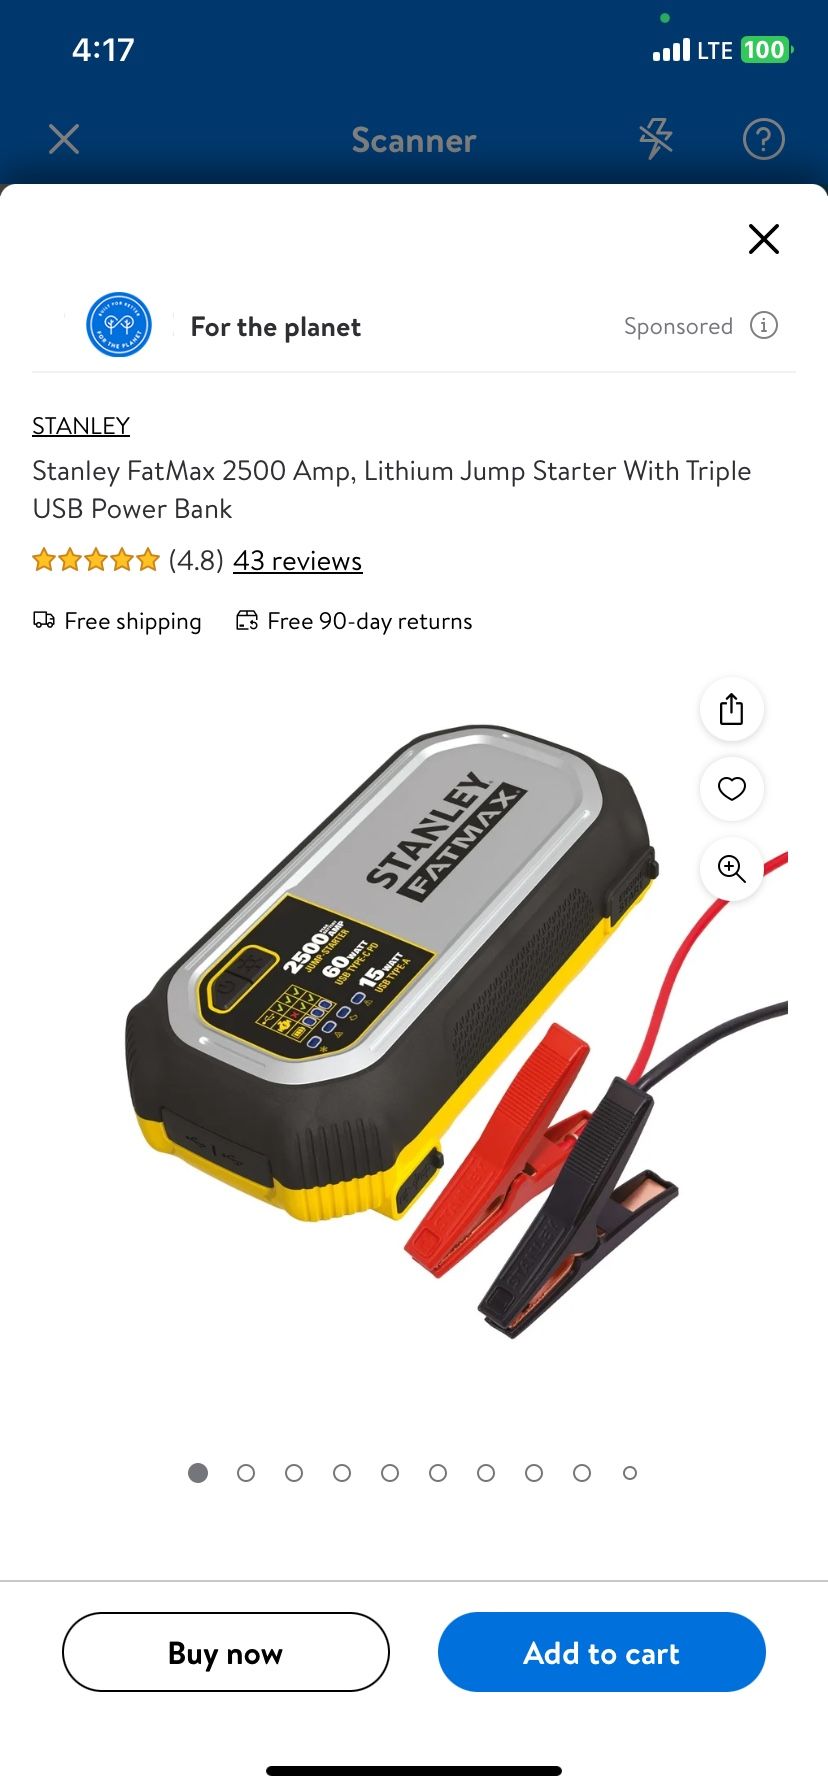 Stanley FatMax 2500 Amp, Lithium Jump Starter With Triple USB Power Bank